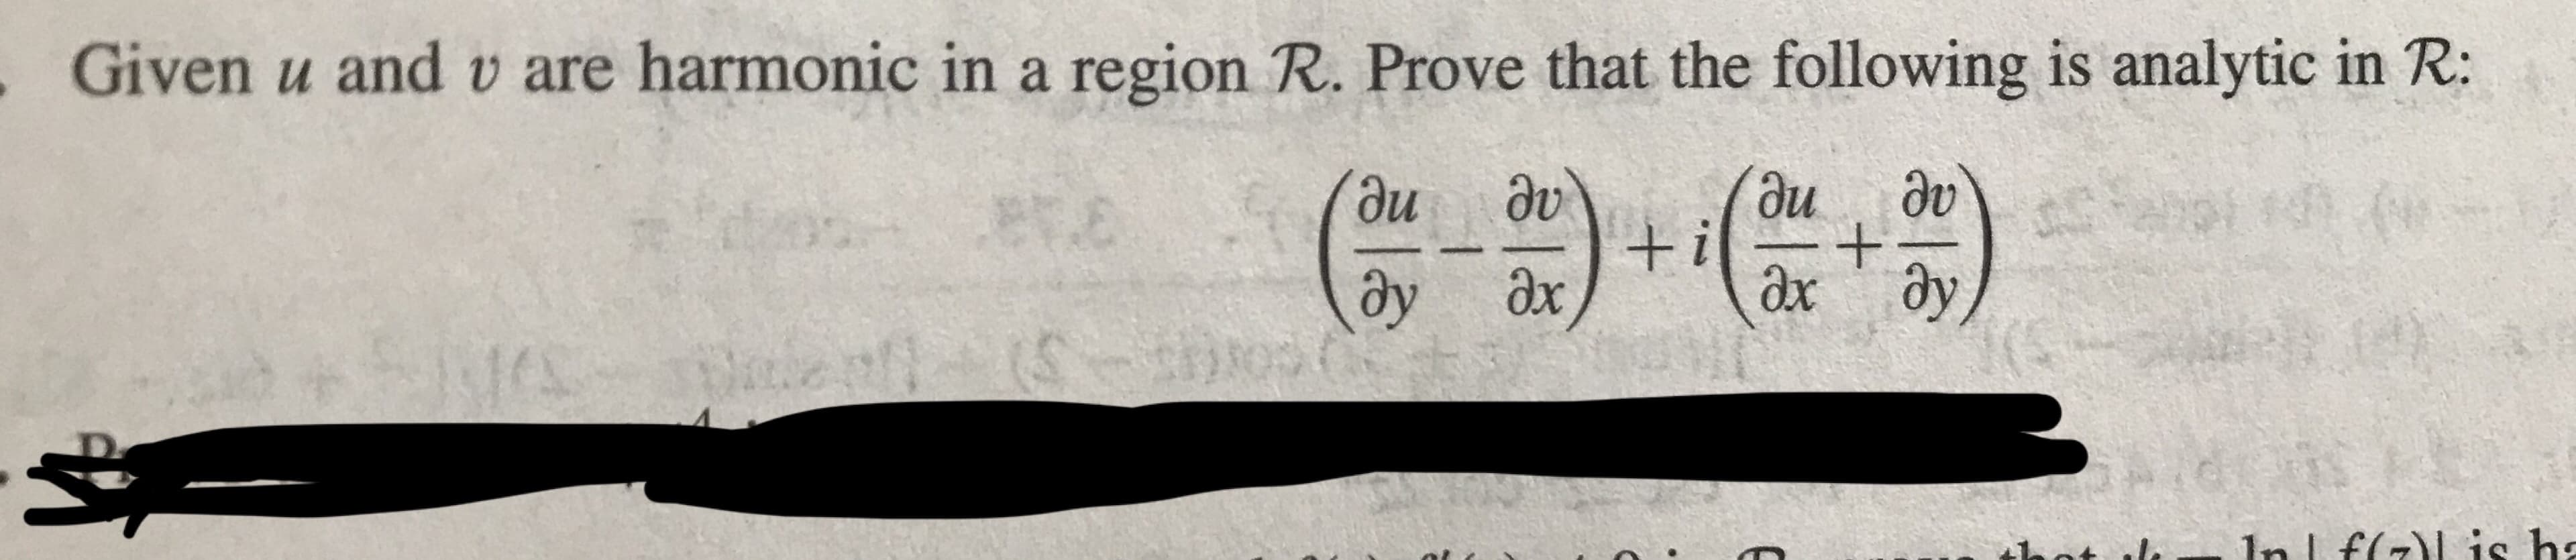 Given u and v are harmonic in a region R. Prove that the following is analytic in R:
ay ar
